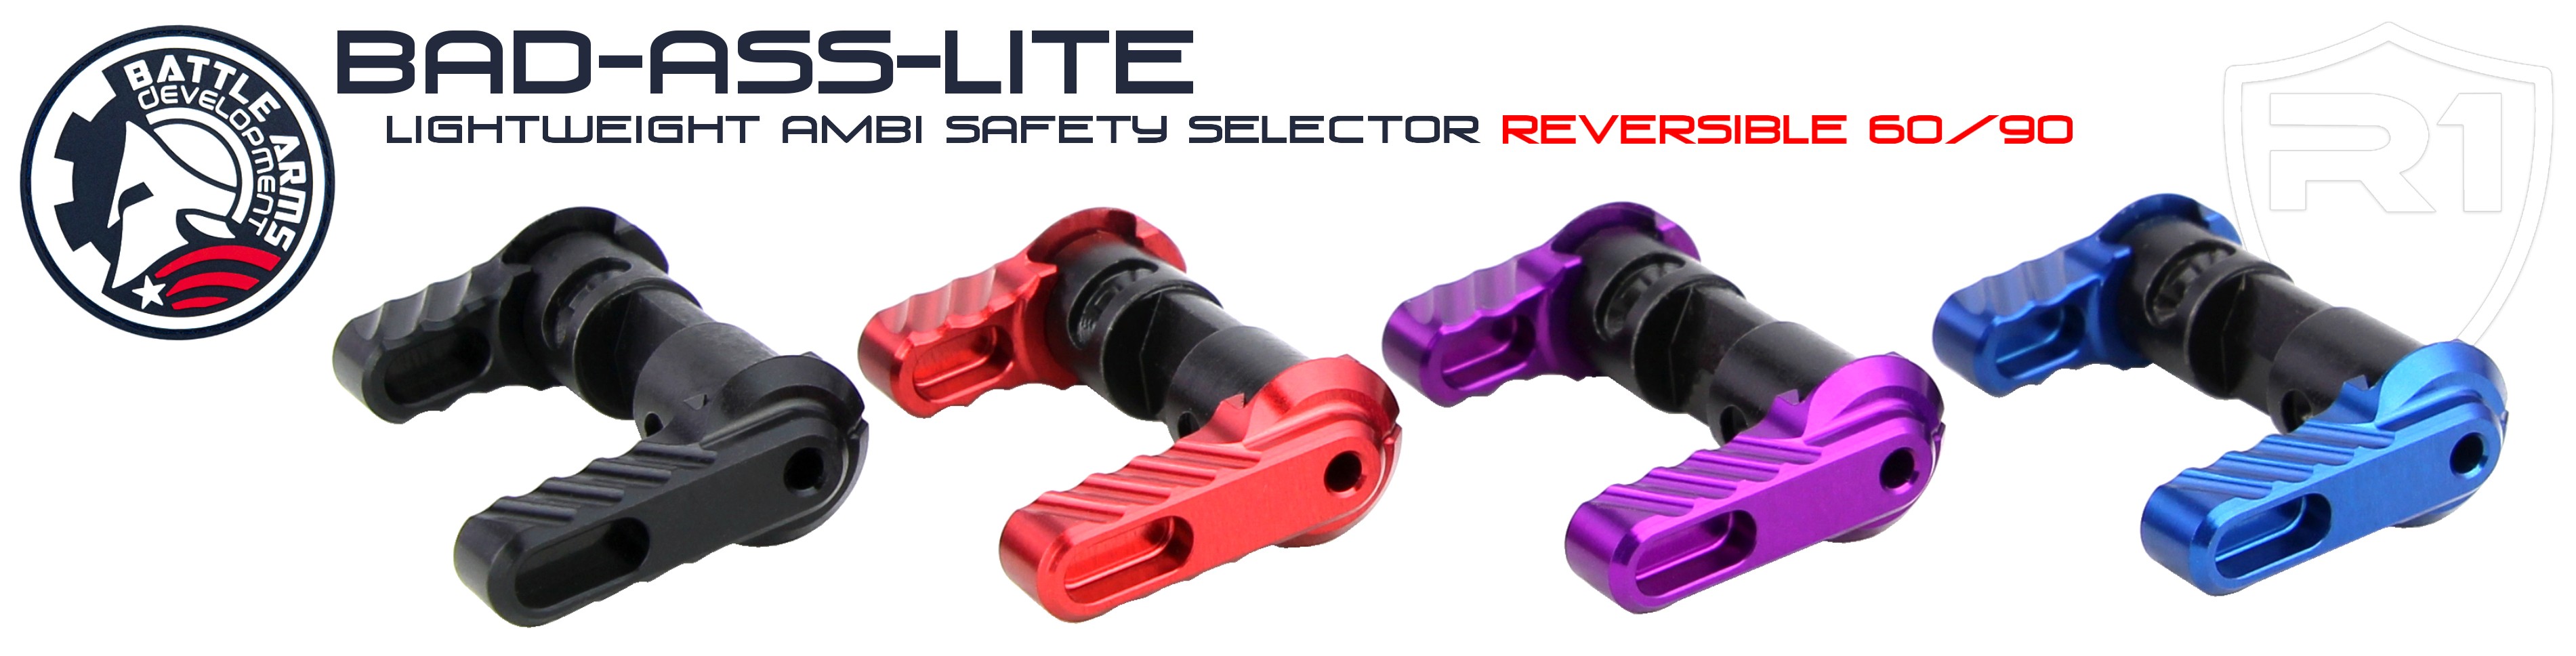 Battle Arms Development Lightweight Ambidextrous Safety Selector 60/90 Degree (BAD-ASS-LITE) - Red | Redcon1 Tactical